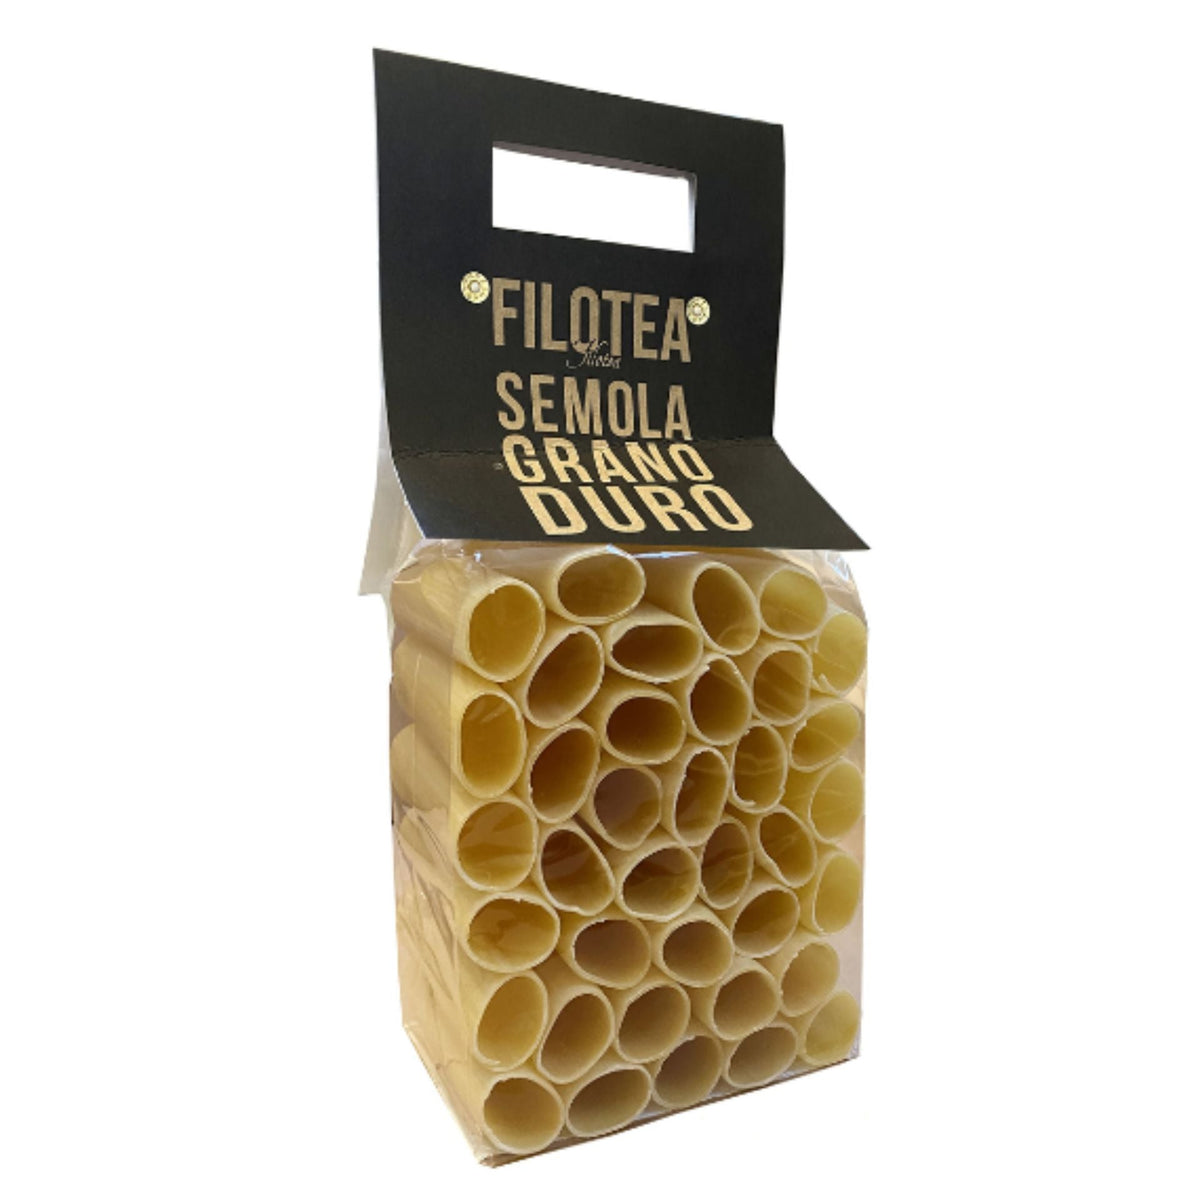 Filotea Cannelloni Durum Wheat Semolina Pasta 500g  | Imported and distributed in the UK by Just Gourmet Foods